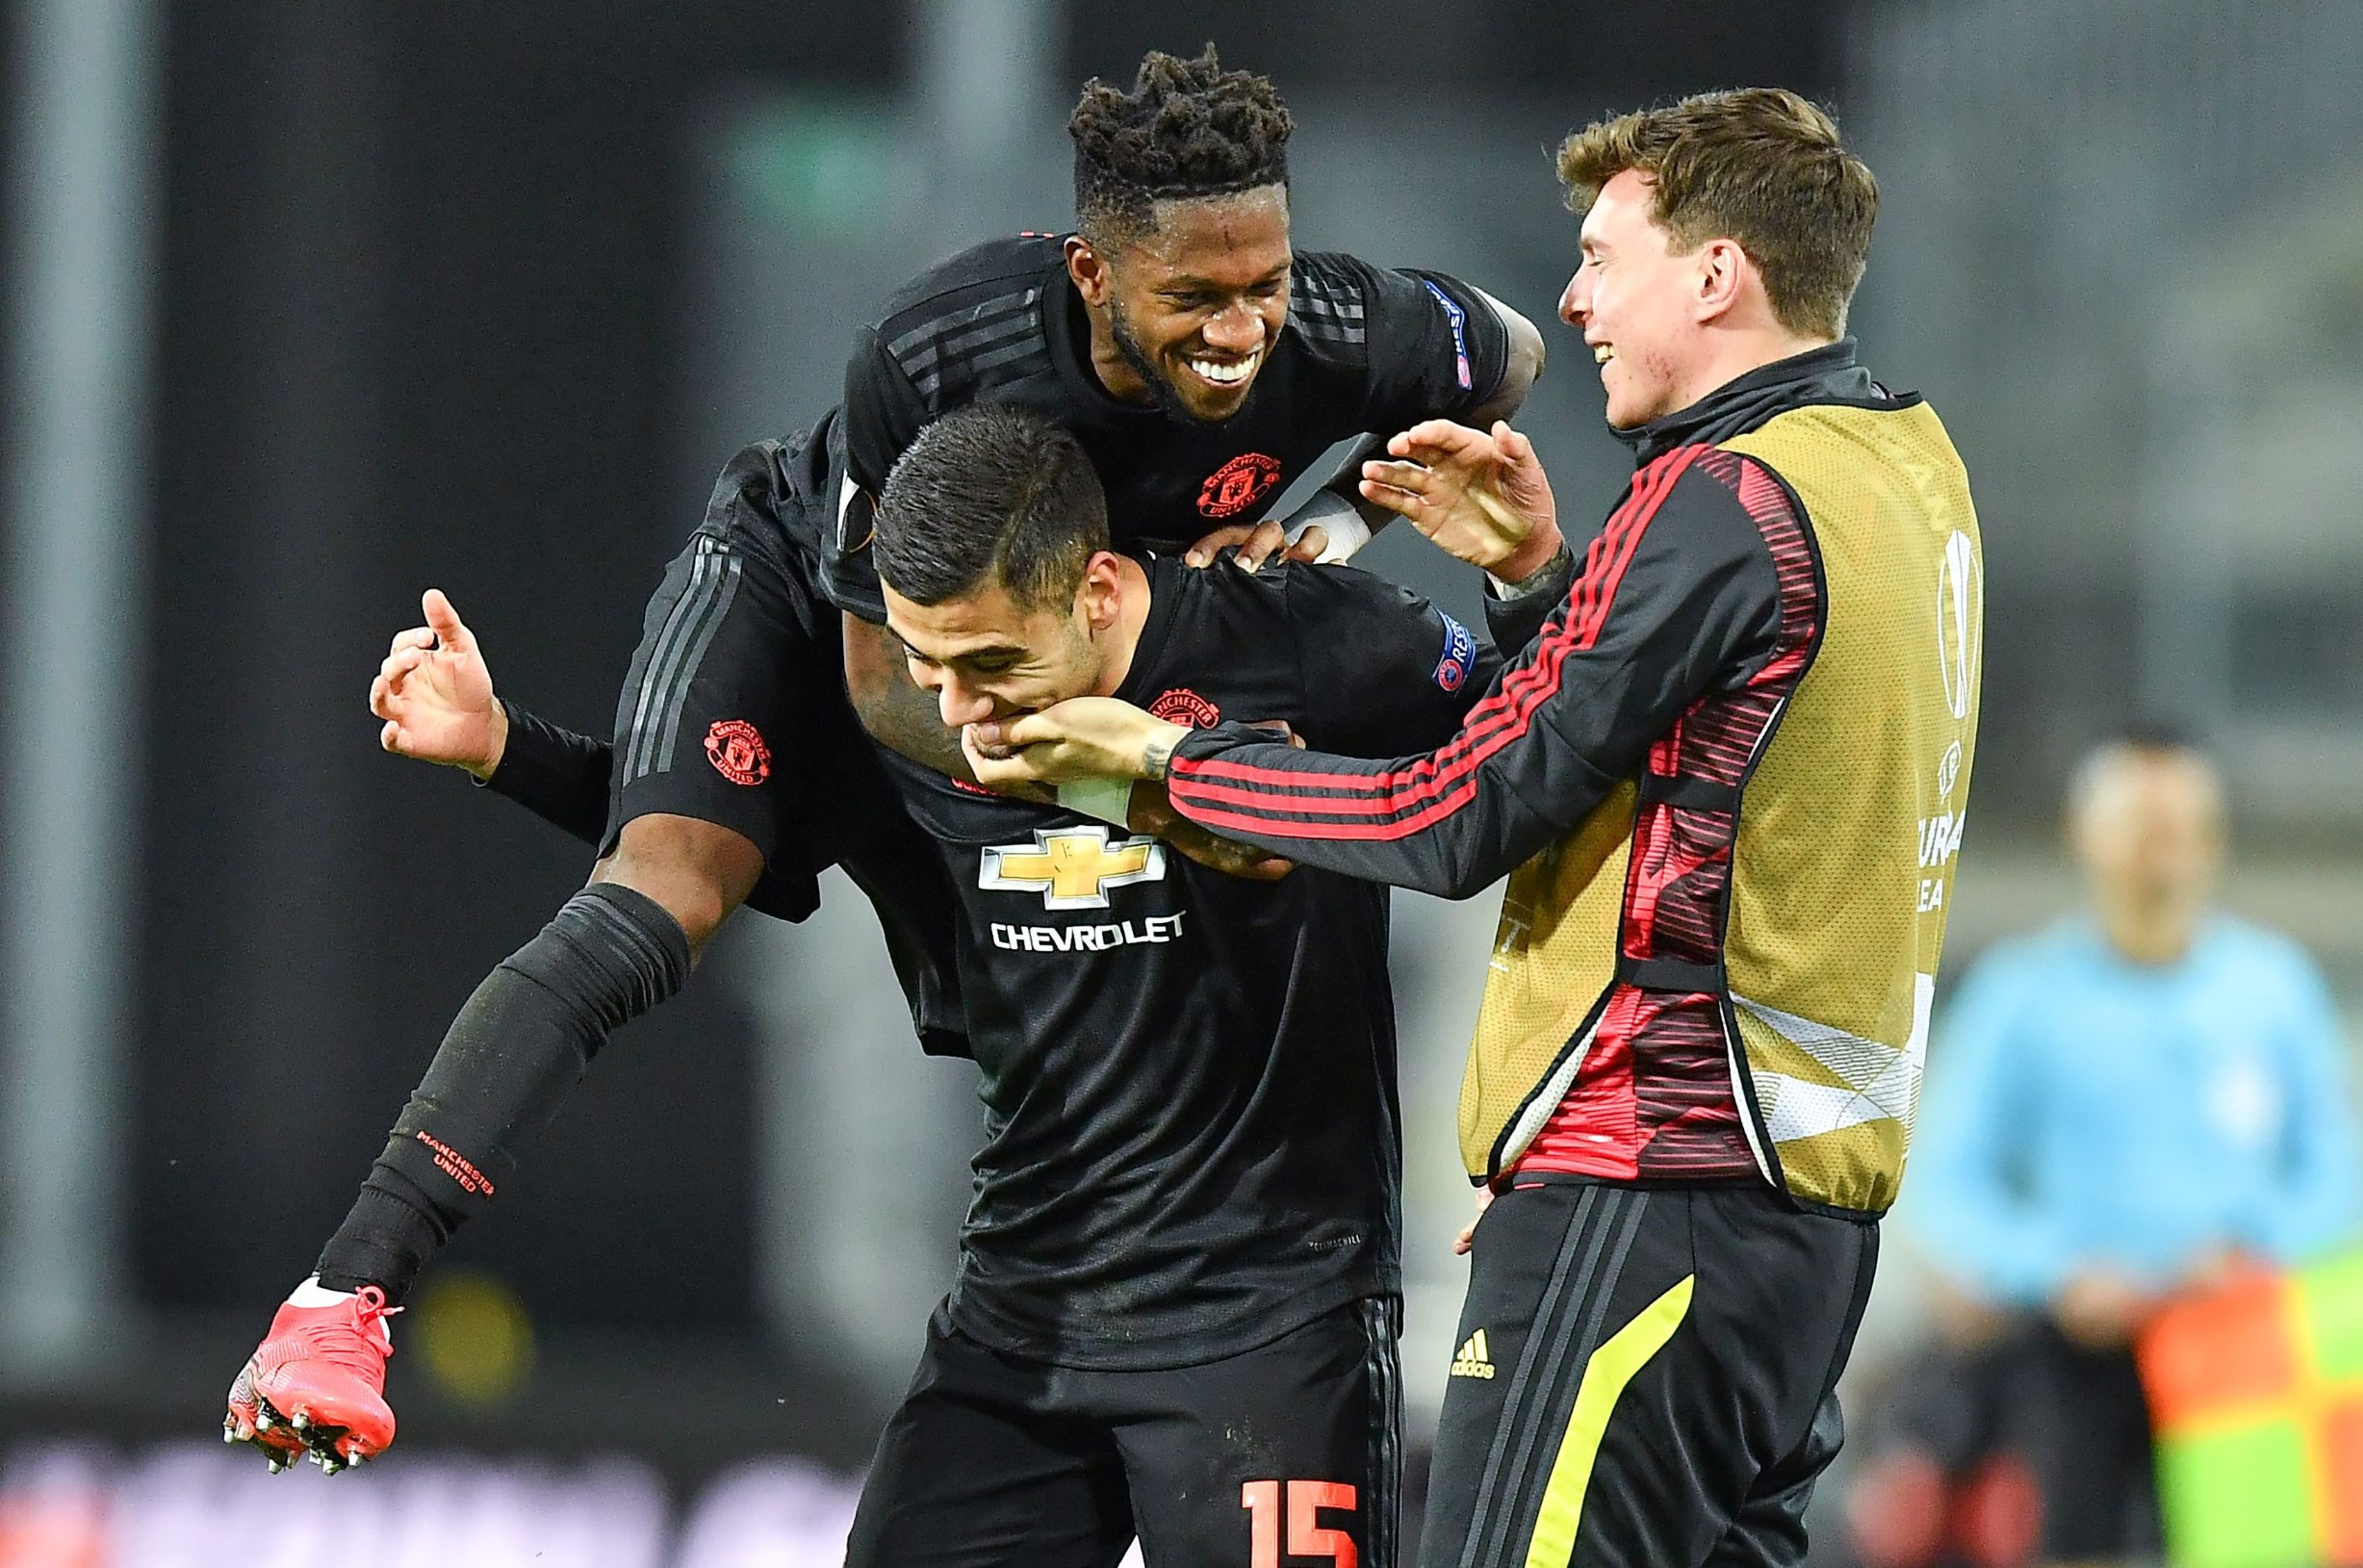 Manchester United's Belgian-born Brazilian midfielder Andreas Pereira (C) celebrates scoring with his team-mates during the UEFA Europa League last 16, first leg football match Linzer ASK (LASK) v Manchester United in Linz, Austria, on March 12, 2020. - The match is being held behind closed doors due to the new coronavirus COVID-19. (Photo by JOE KLAMAR / AFP)